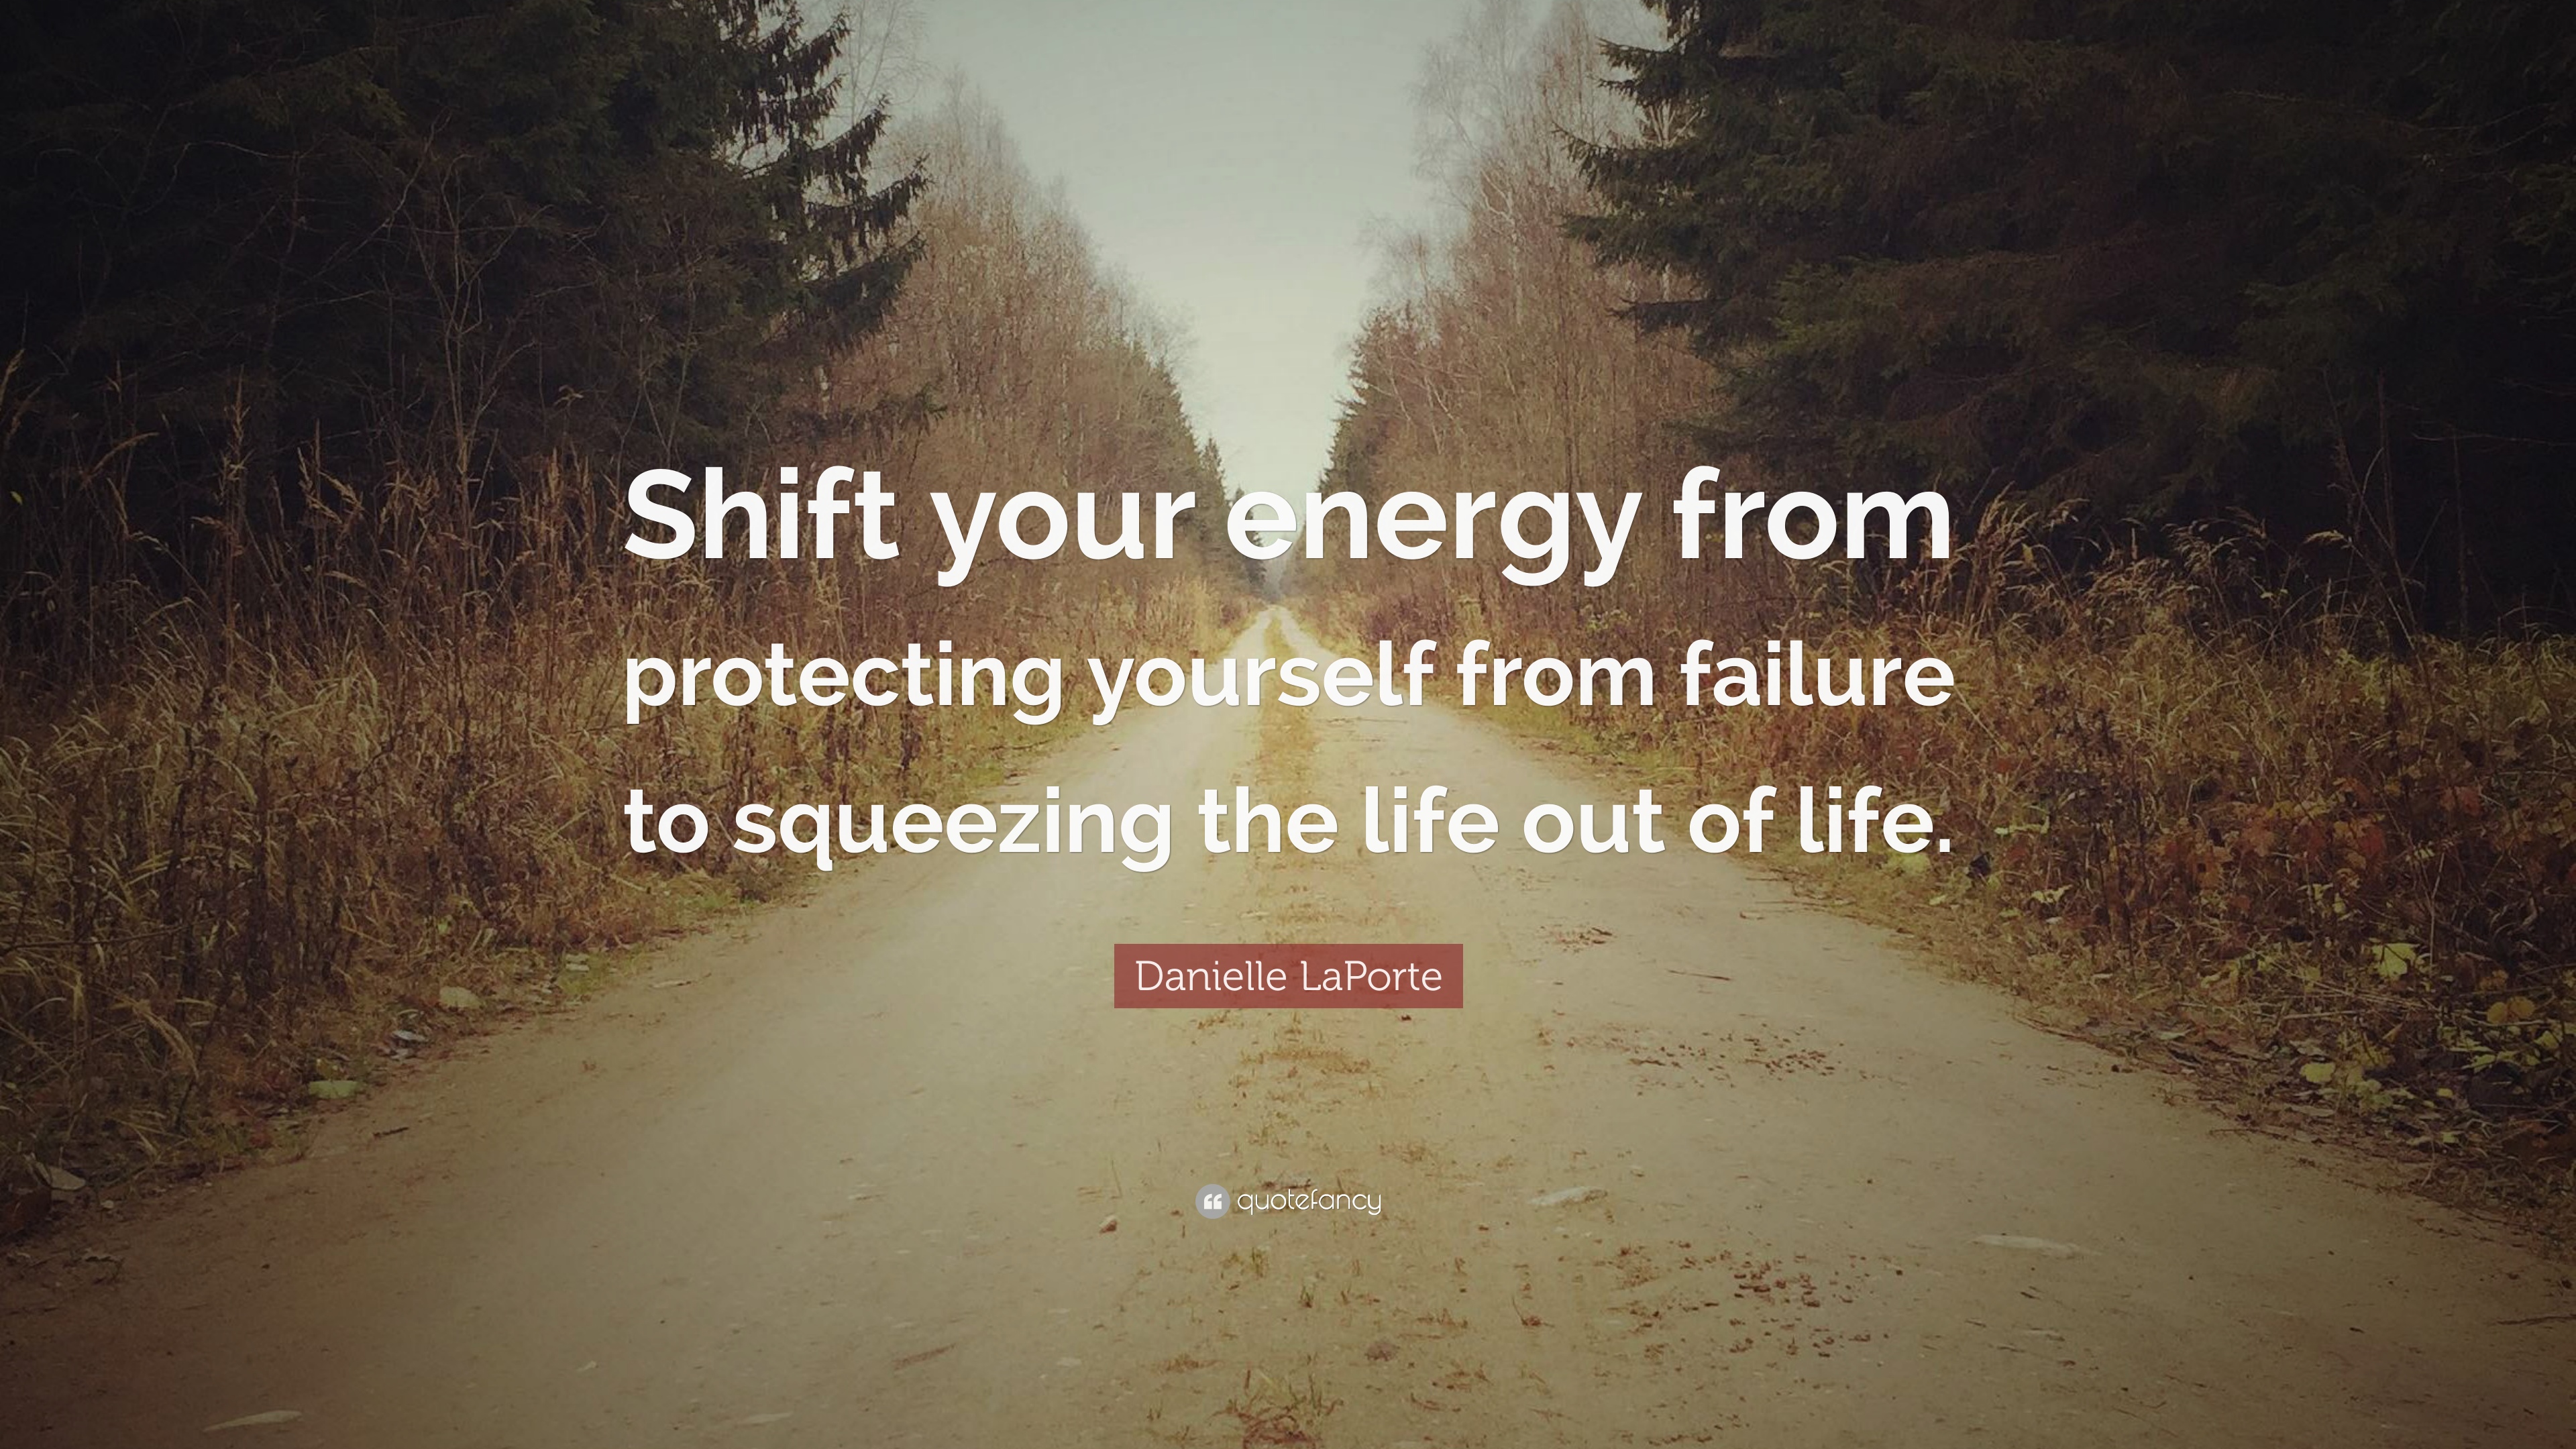 Danielle LaPorte Quote: “Shift your energy from protecting yourself ...